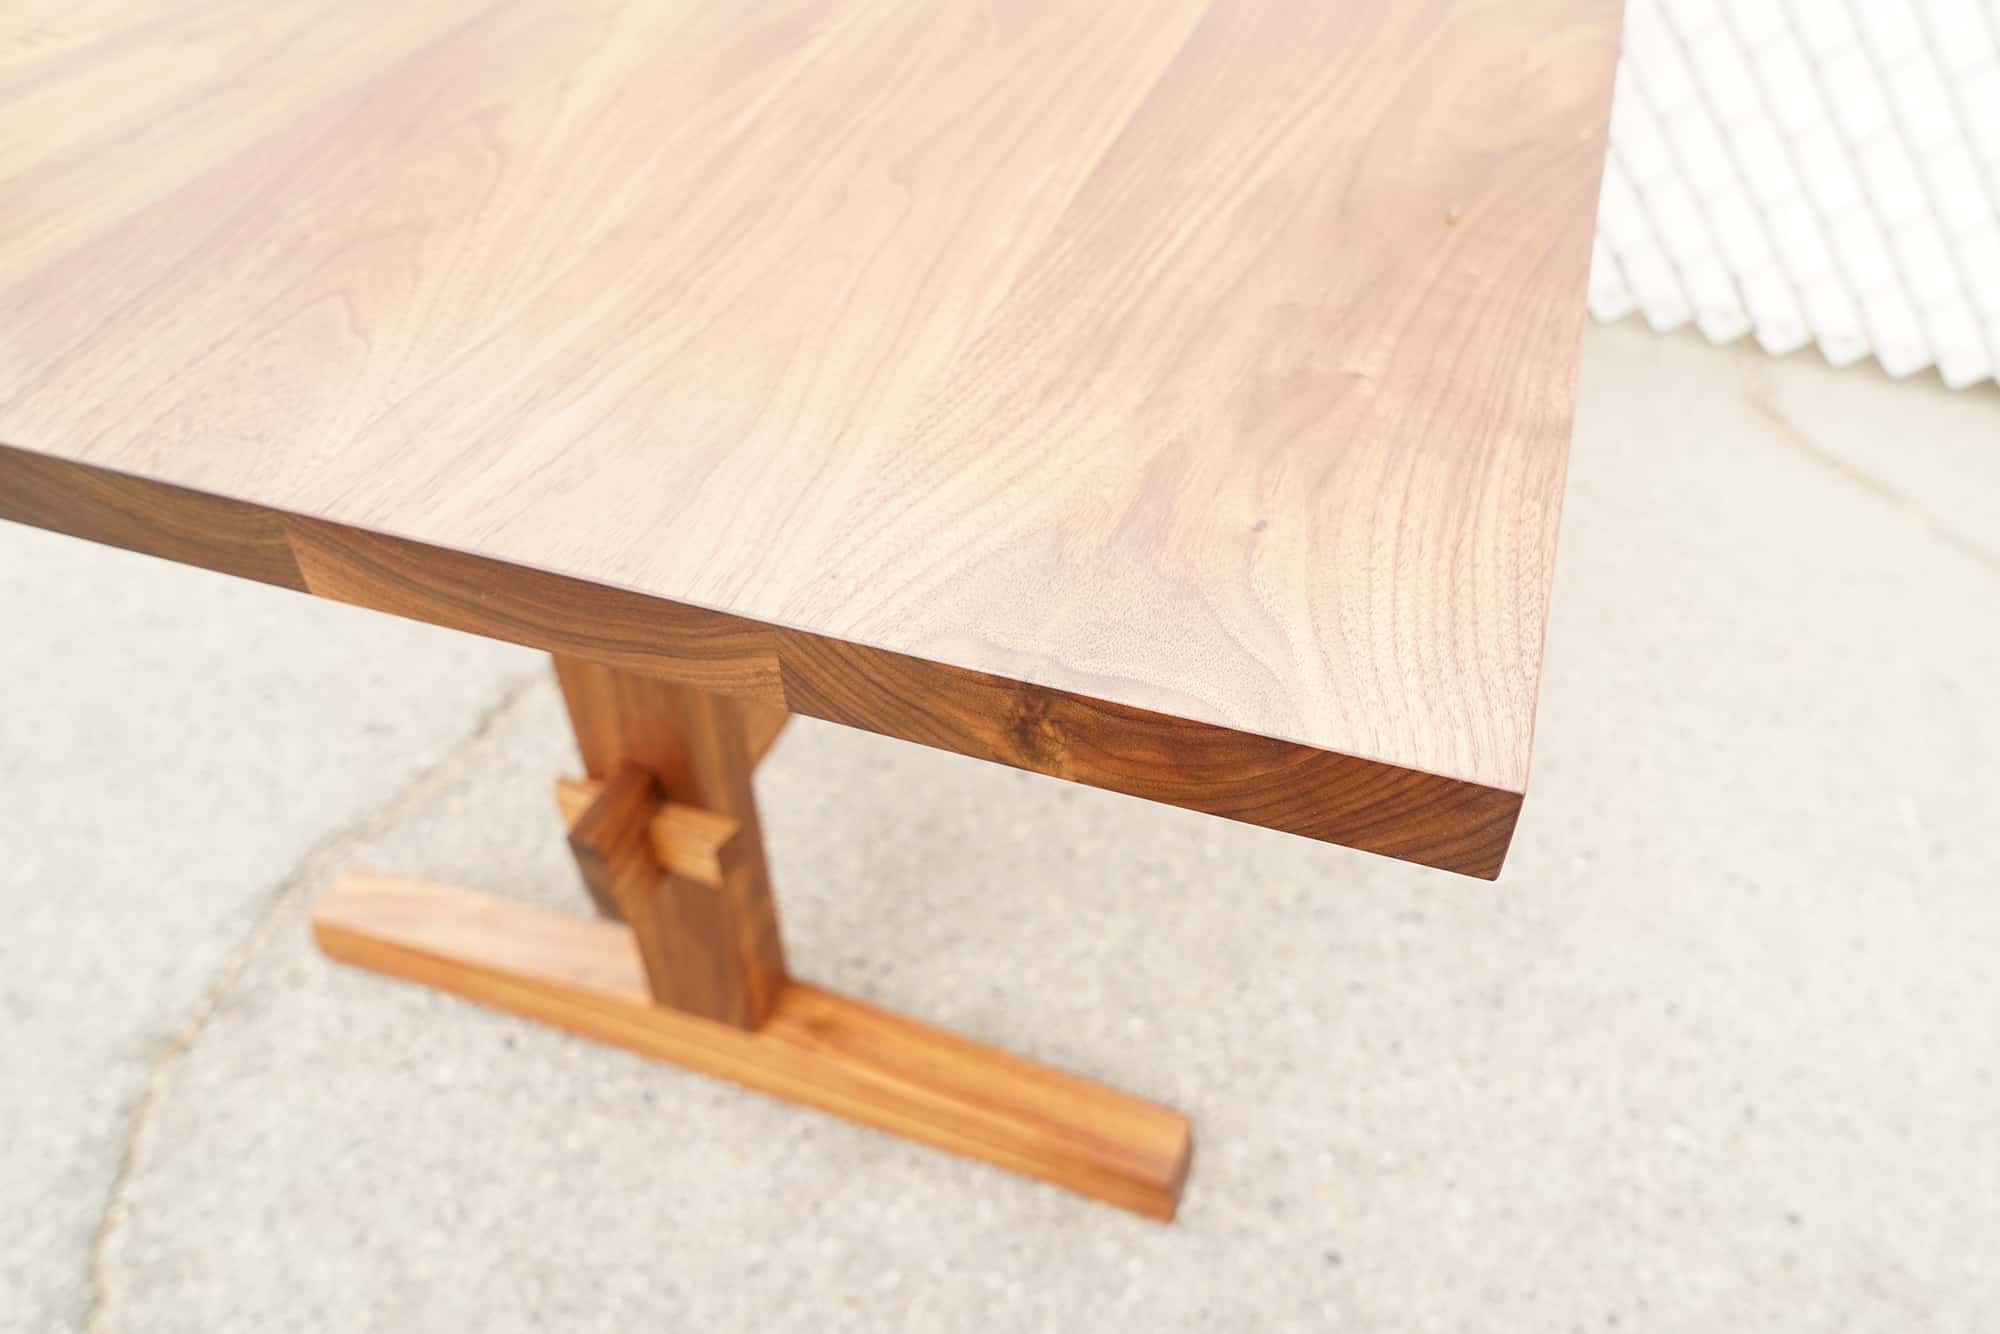 Knock Down Dining Table Offerman Wood, Trestle Style Dining Room Tables